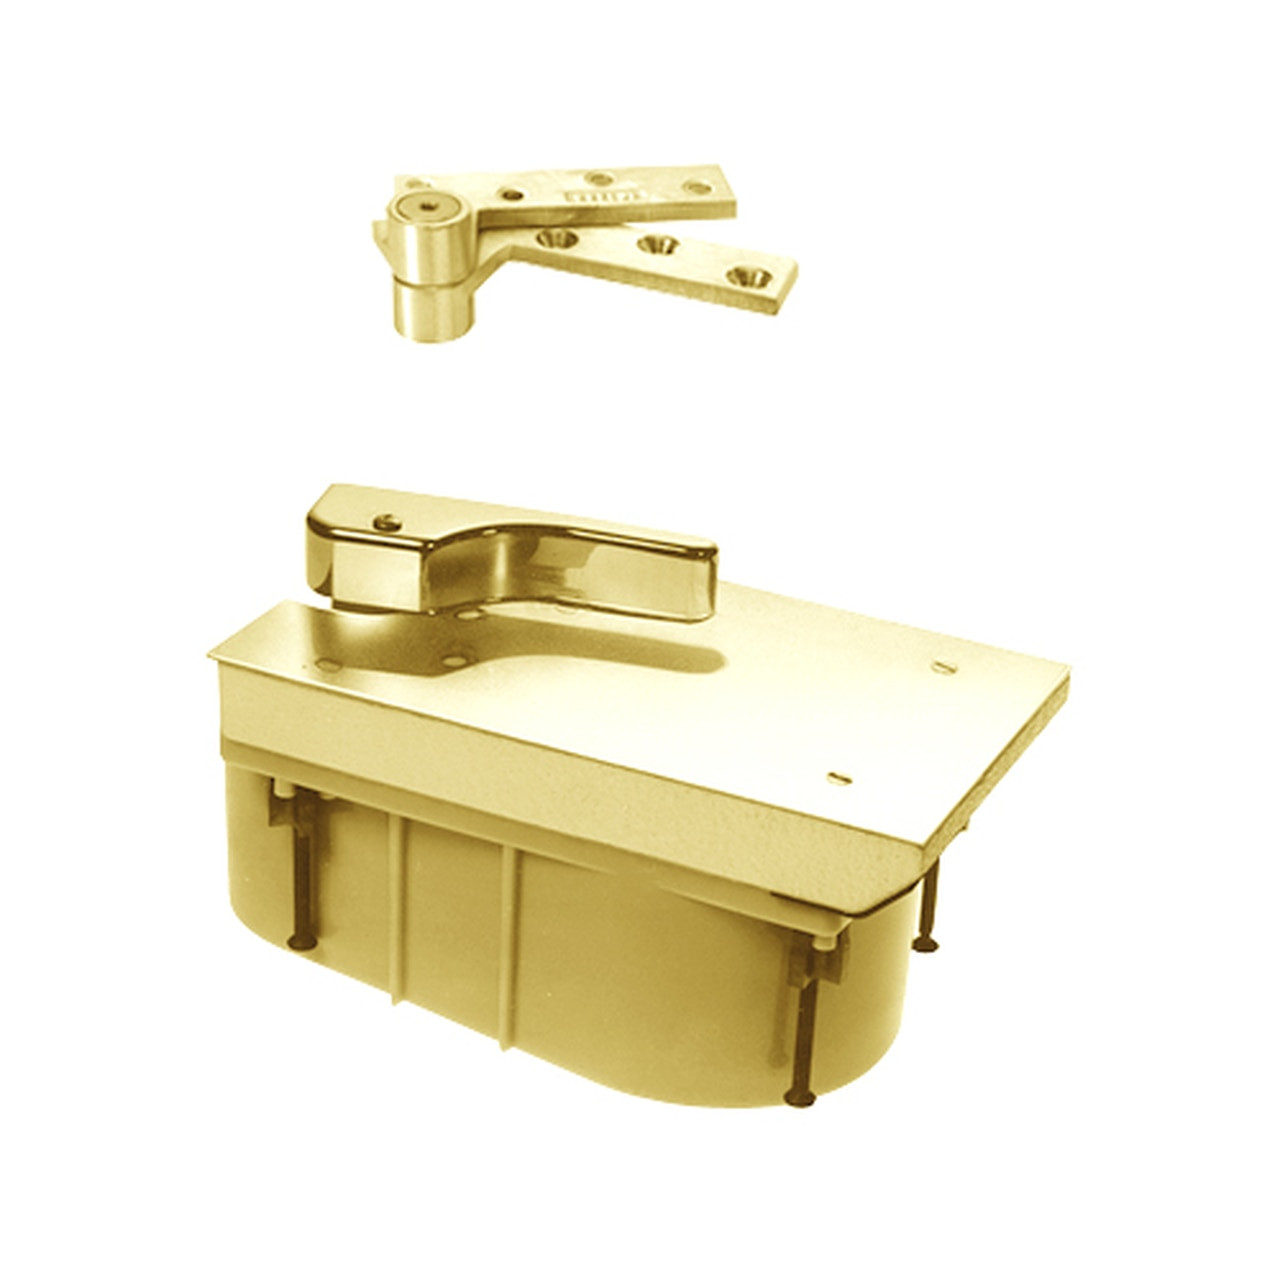 FQ27-85N-LFP-LH-605 Rixson 27 Series Heavy Duty Quick Install Offset Hung Floor Closer in Bright Brass Finish